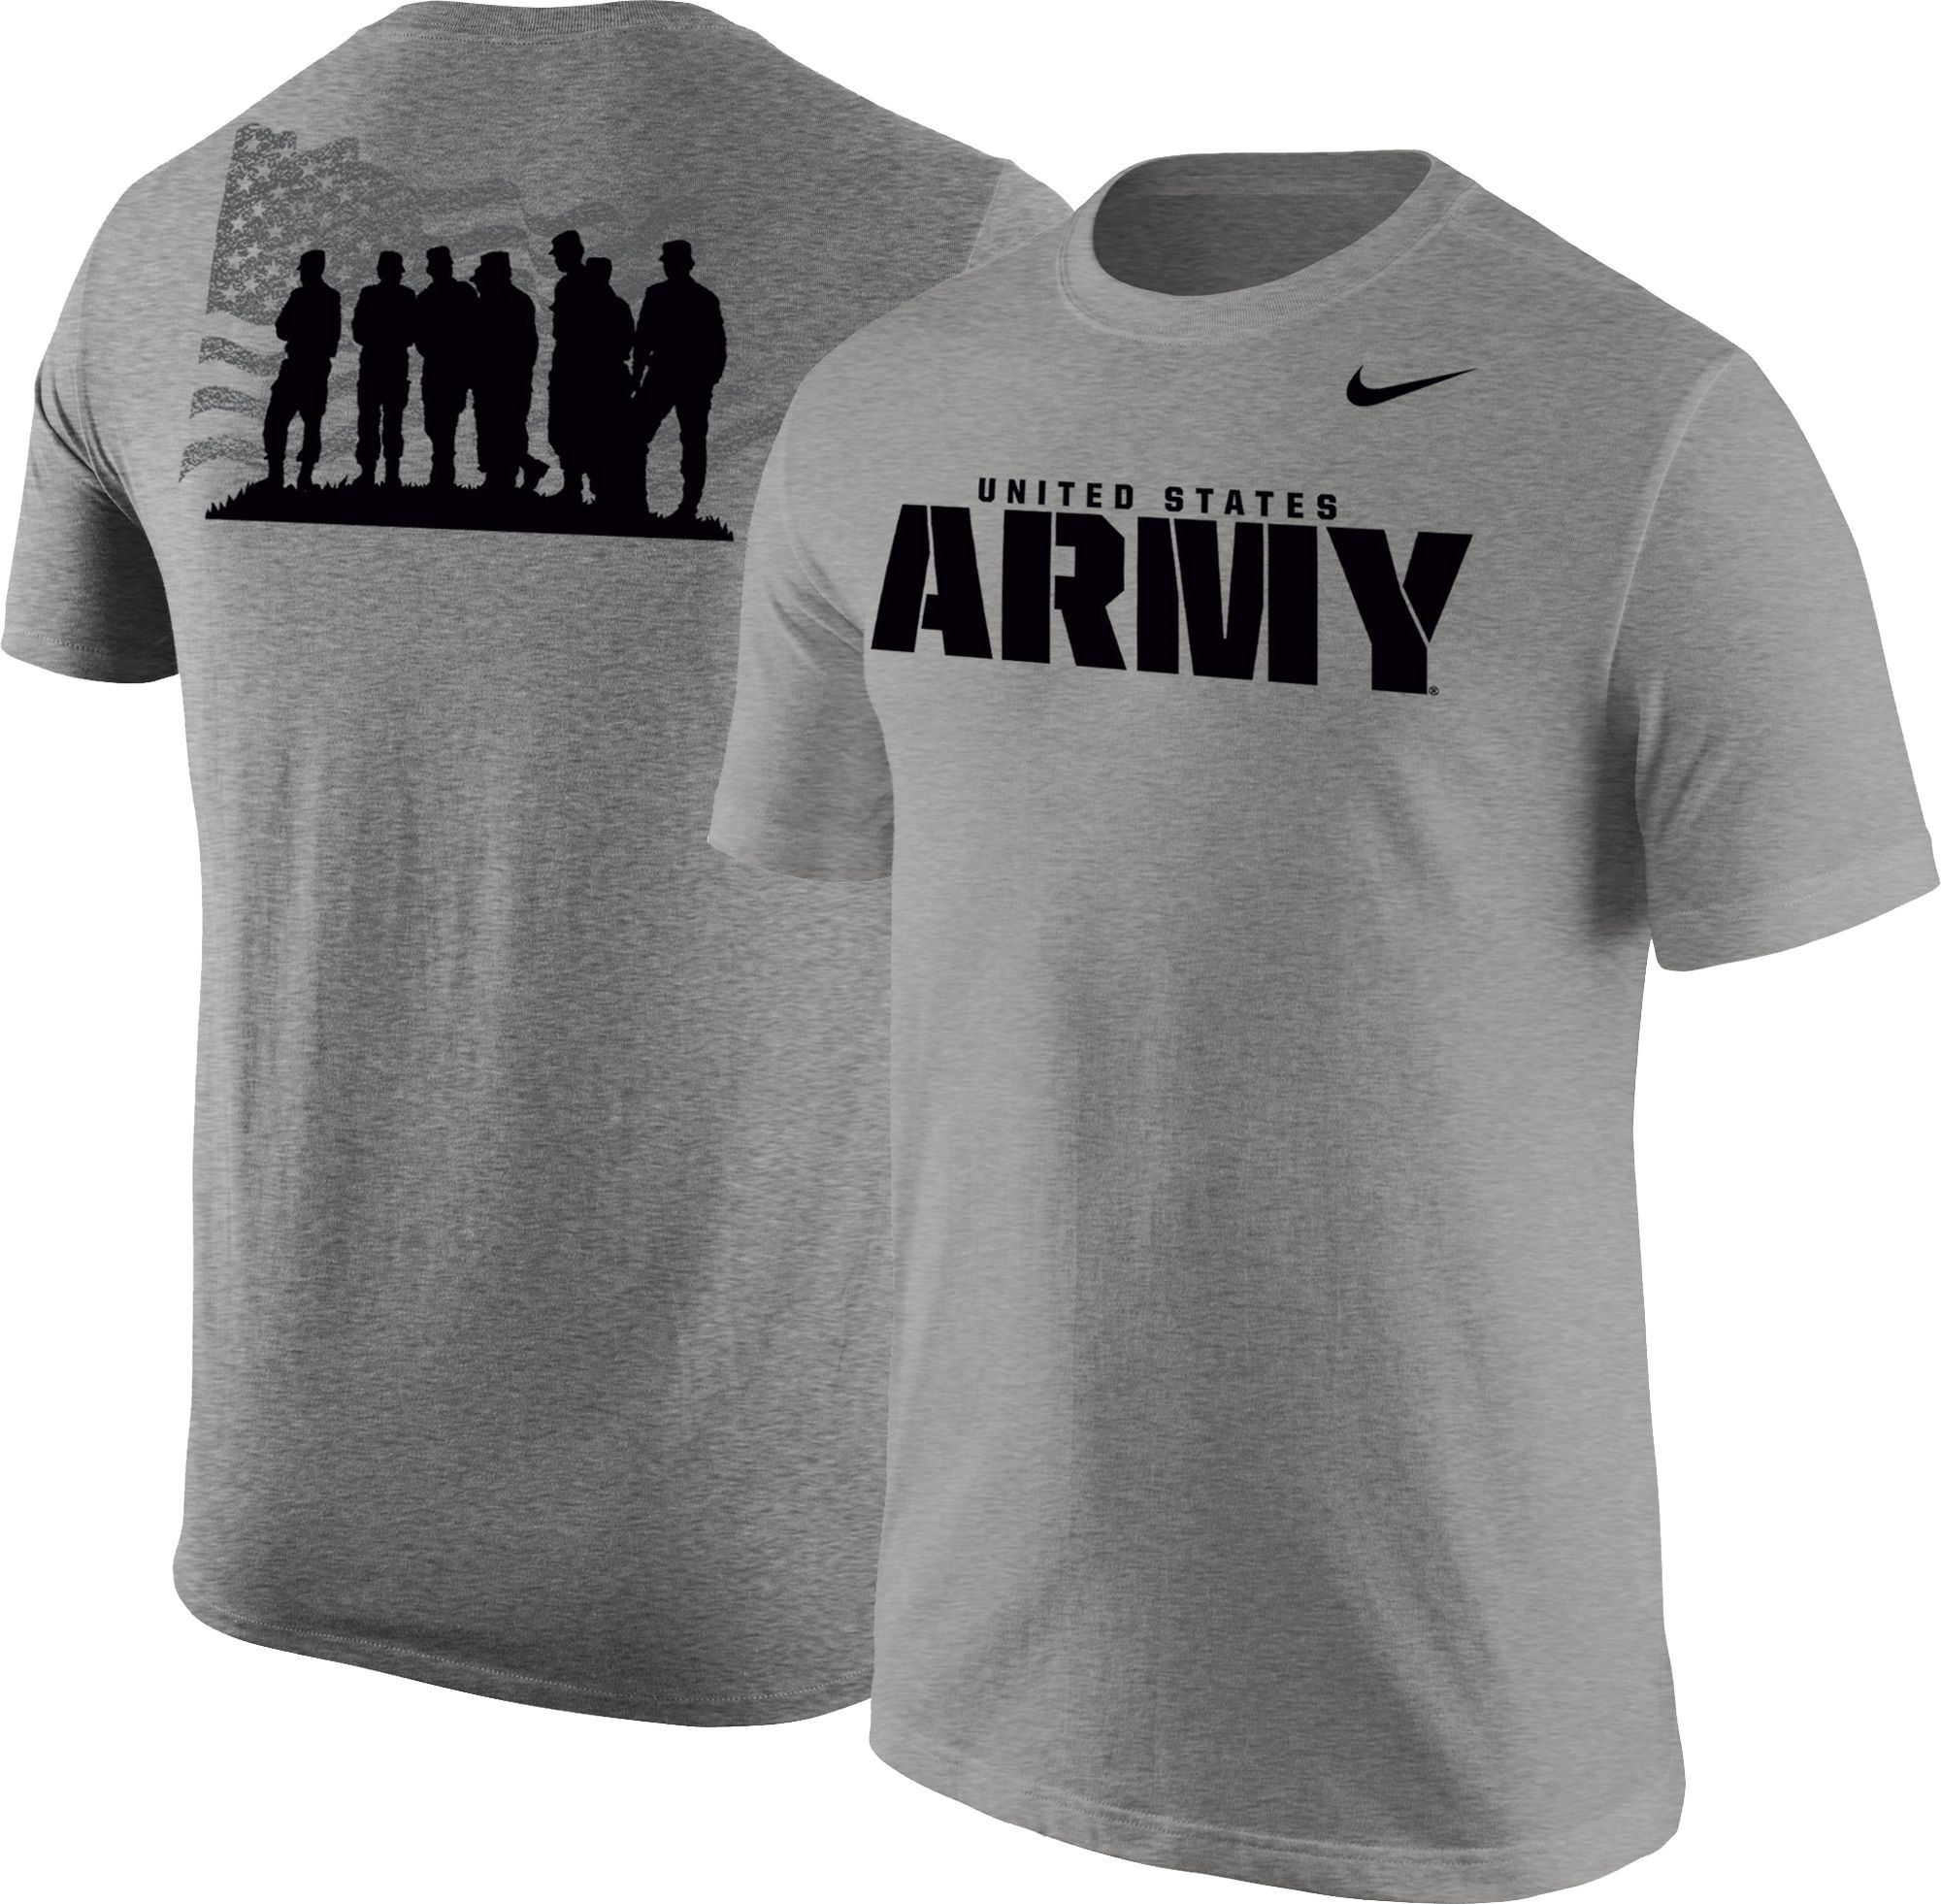 States Army Grey Troops T-Shirt 